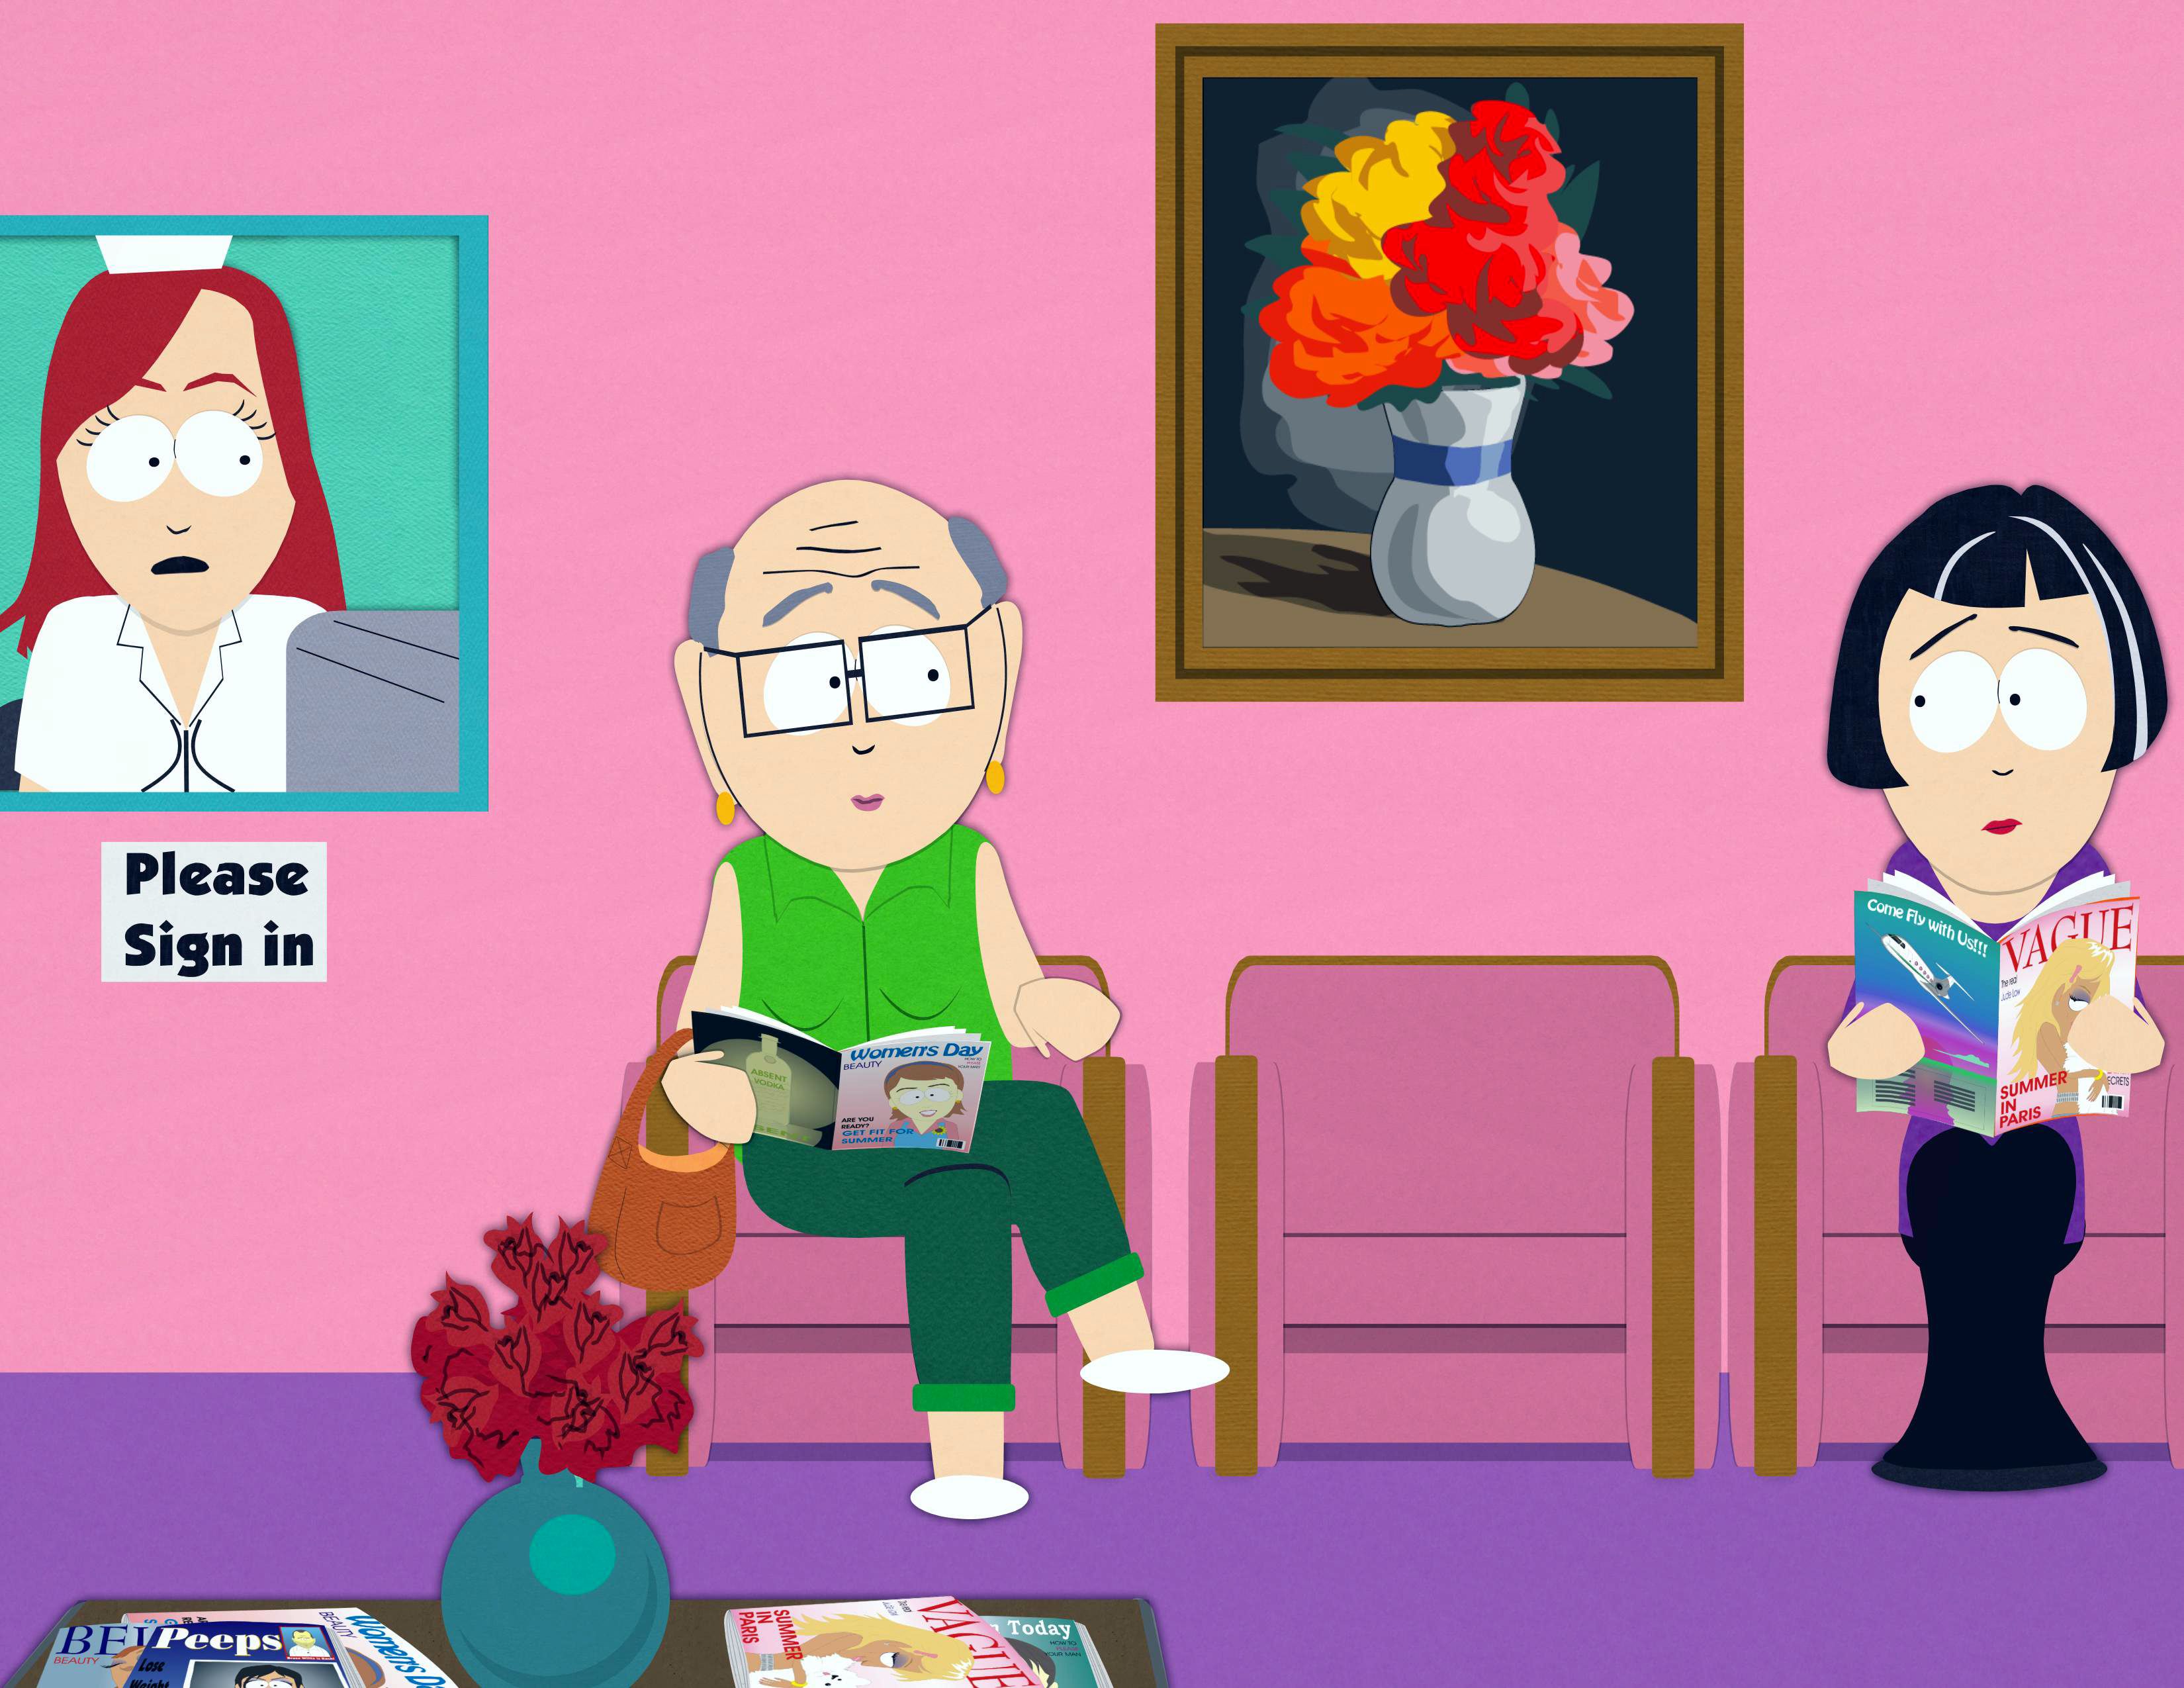 Mr. Garrison waits in a doctor's office